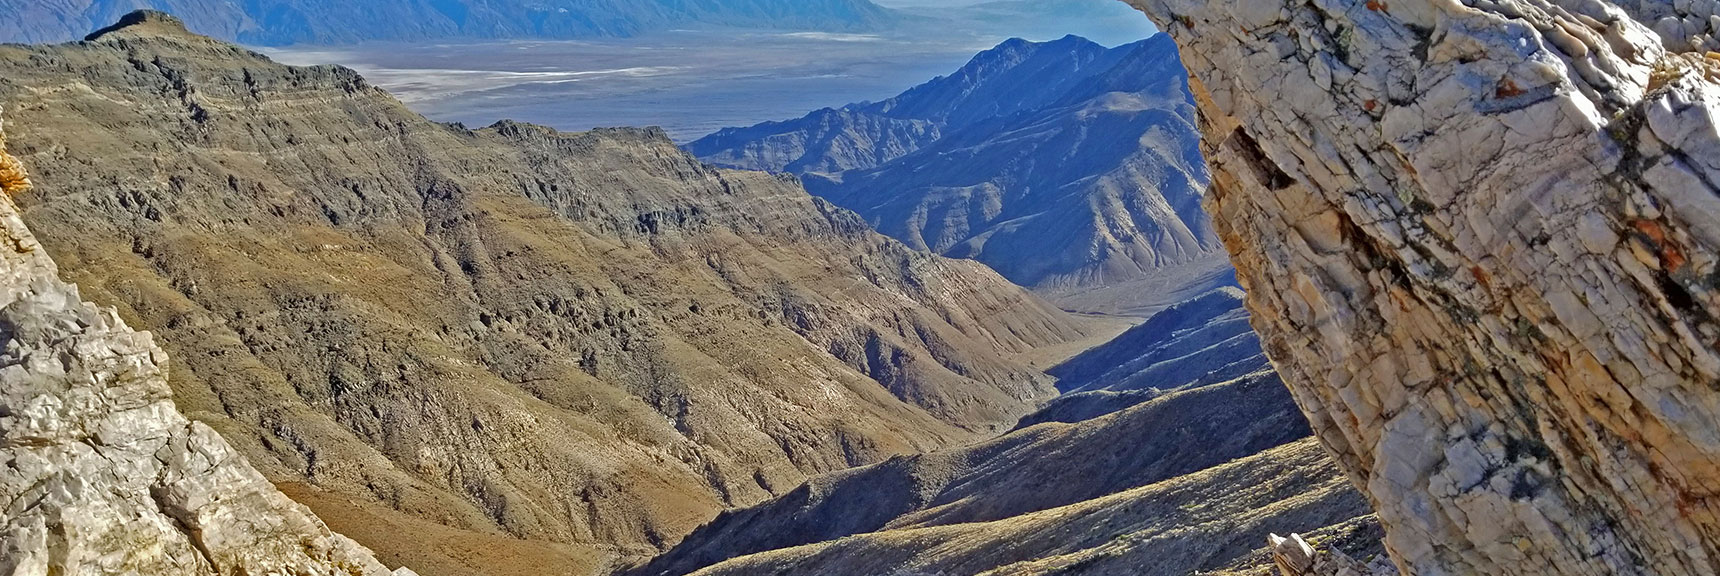 Southeastern Approach Canyon to Aguereberry Point | Aguereberry Point | Panamint Mountain Range | Death Valley National Park, California